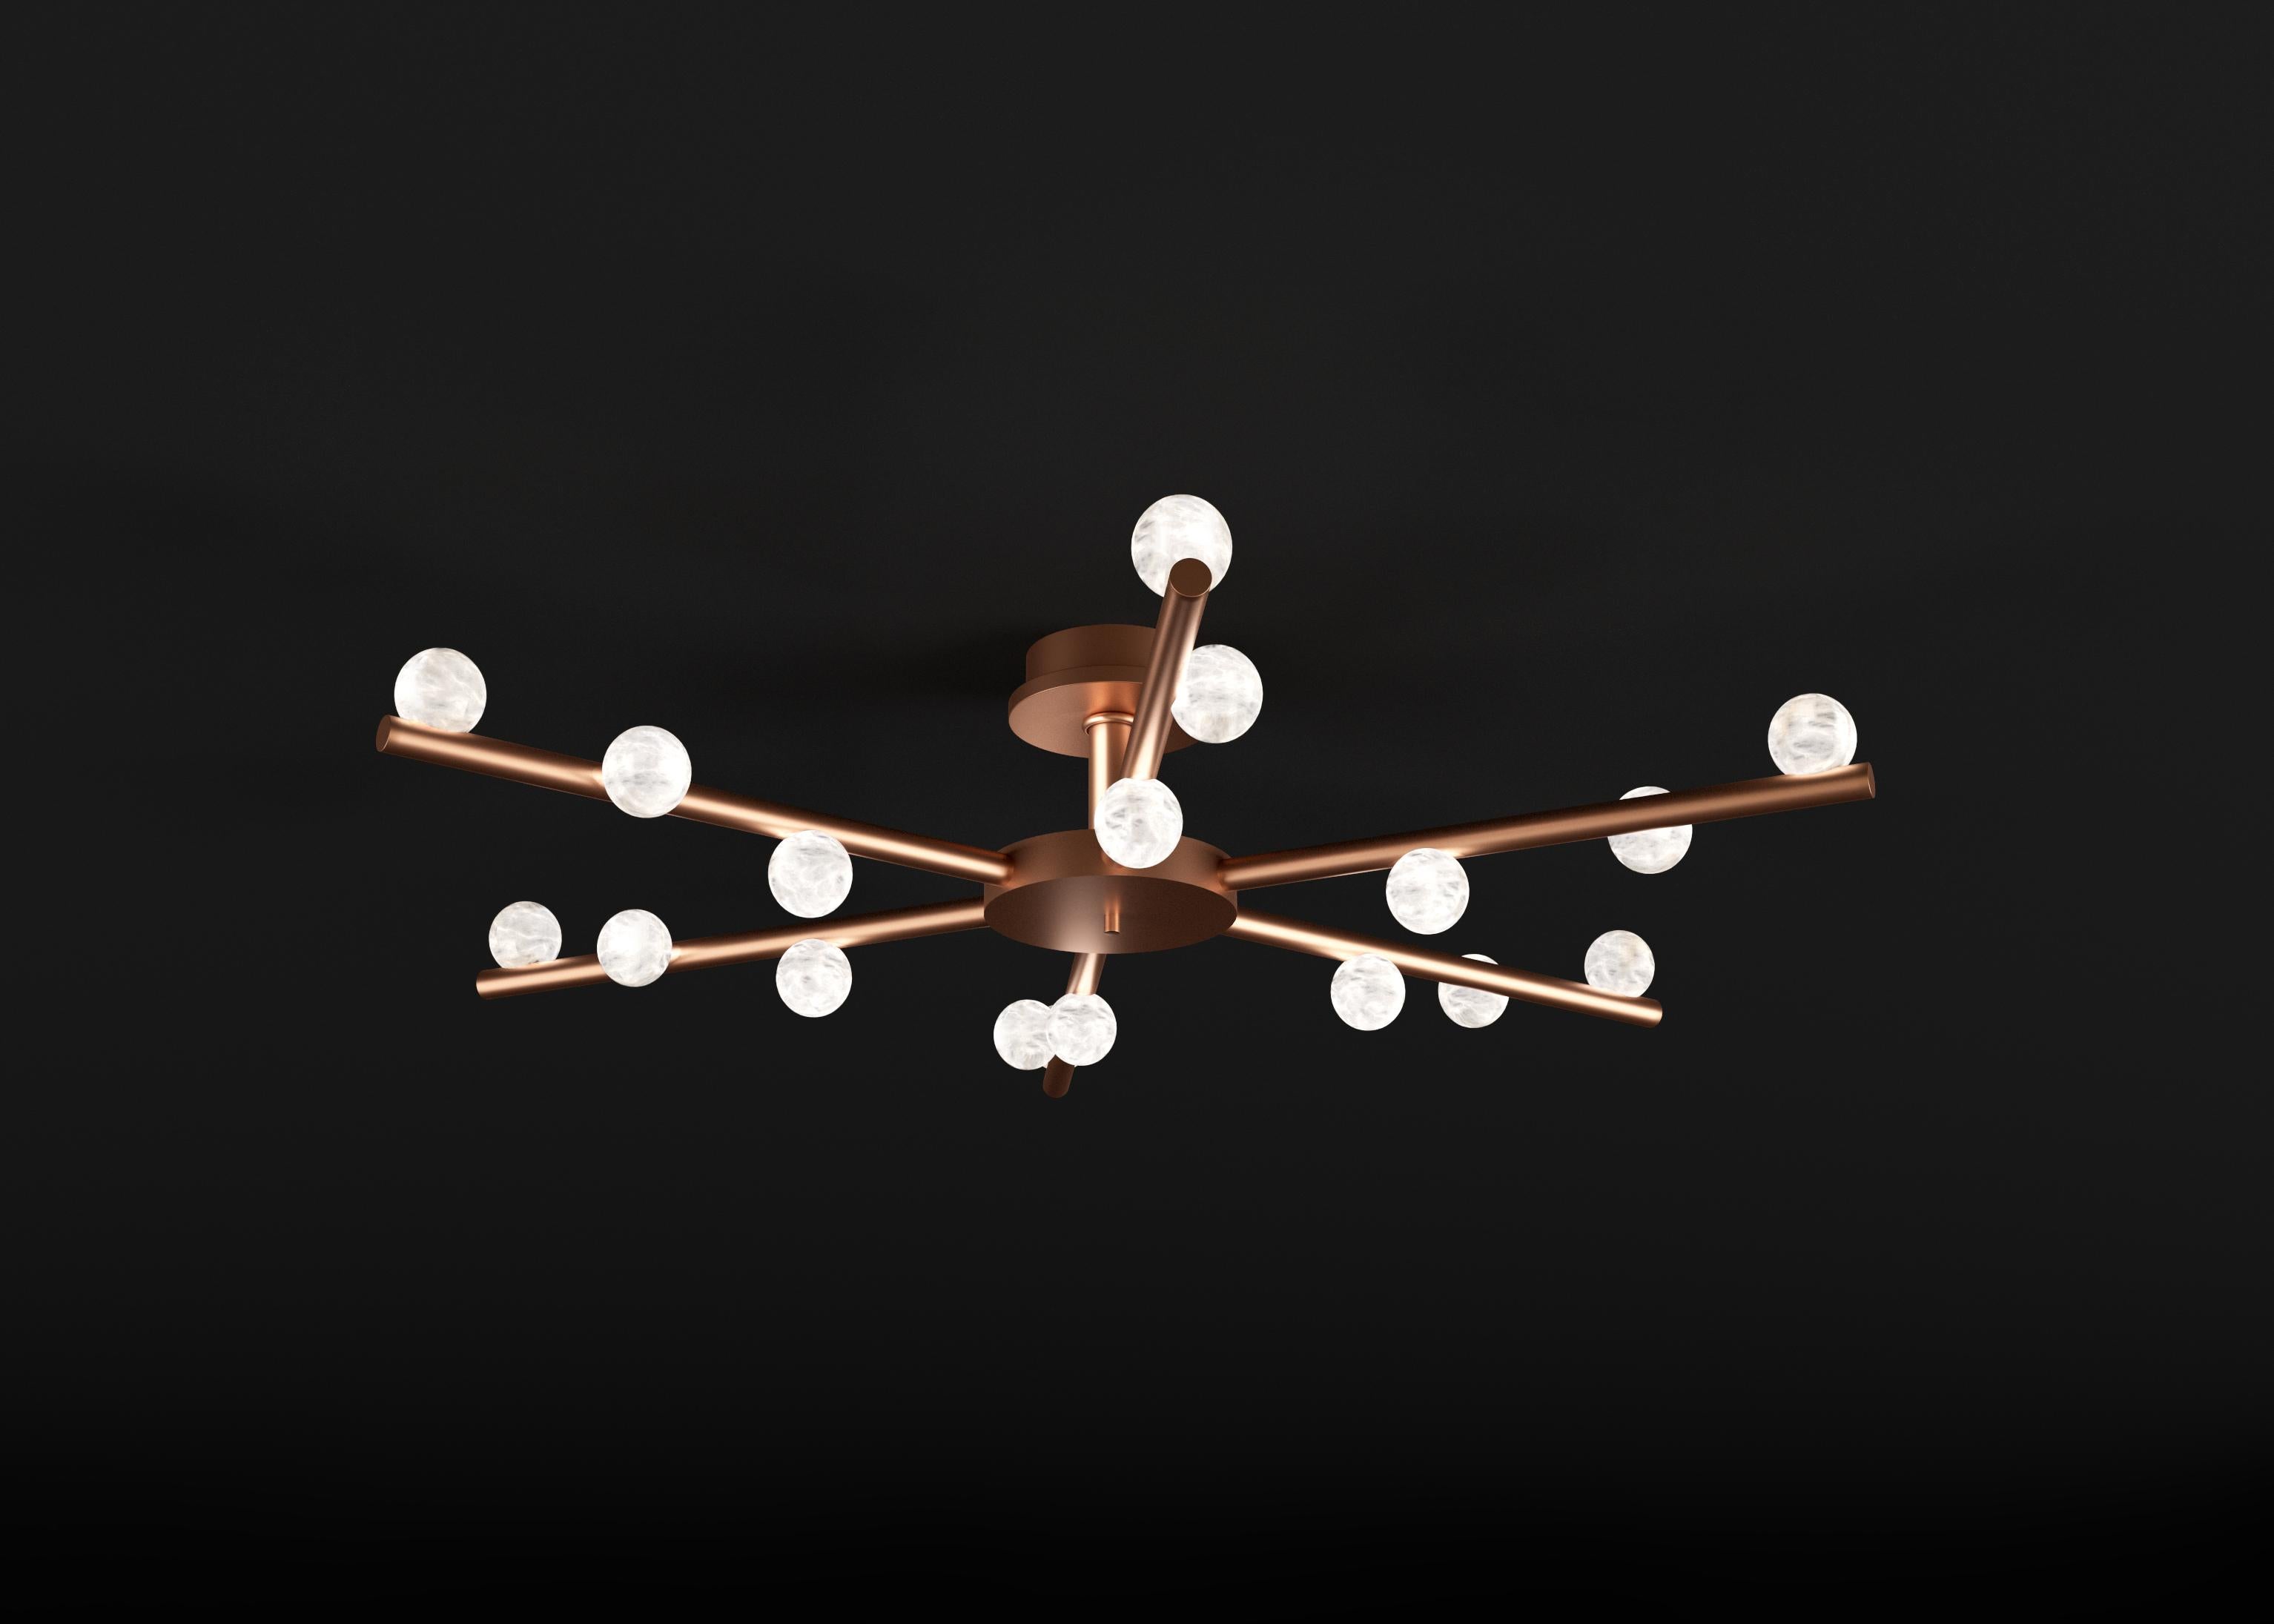 Demetra Copper Ceiling Lamp by Alabastro Italiano
Dimensions: D 85 x W 97 x H 22 cm.
Materials: White alabaster and copper.

Available in different finishes: Shiny Silver, Bronze, Brushed Brass, Ruggine of Florence, Brushed Burnished, Shiny Gold,